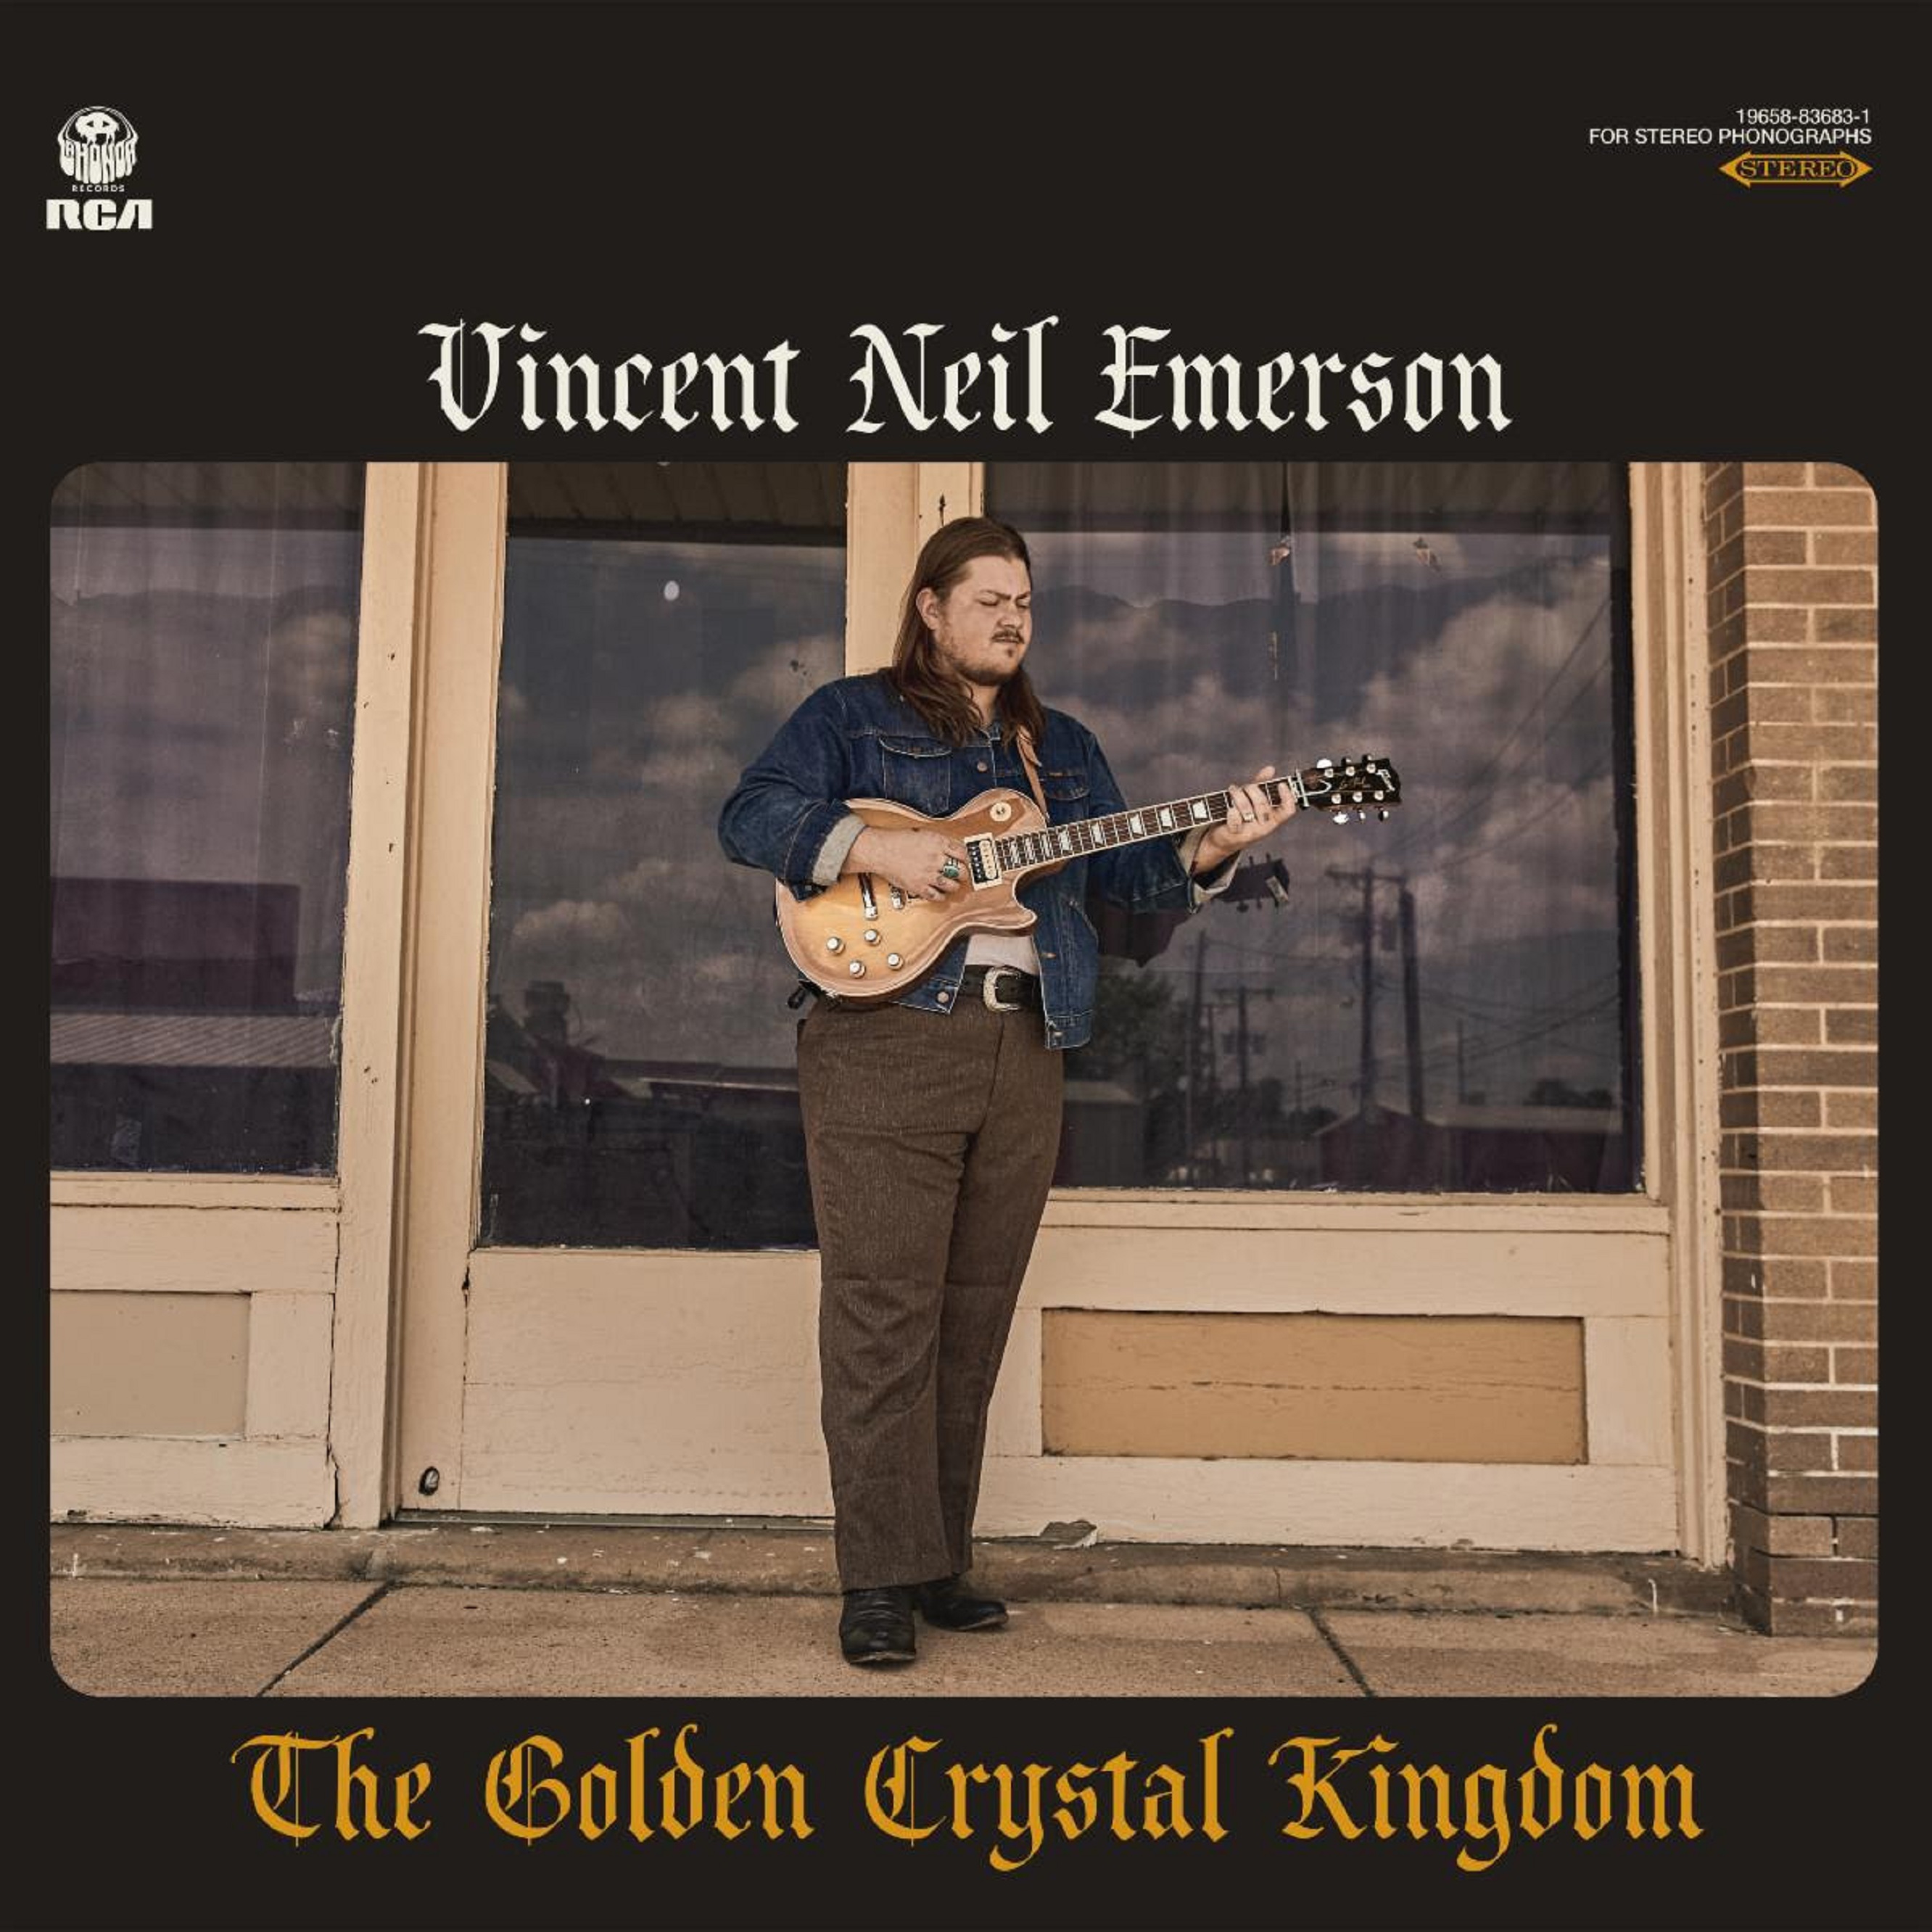 Vincent Neil Emerson Shares Title Track From Upcoming Shooter Jennings-Produced Album The Golden Crystal Kingdom